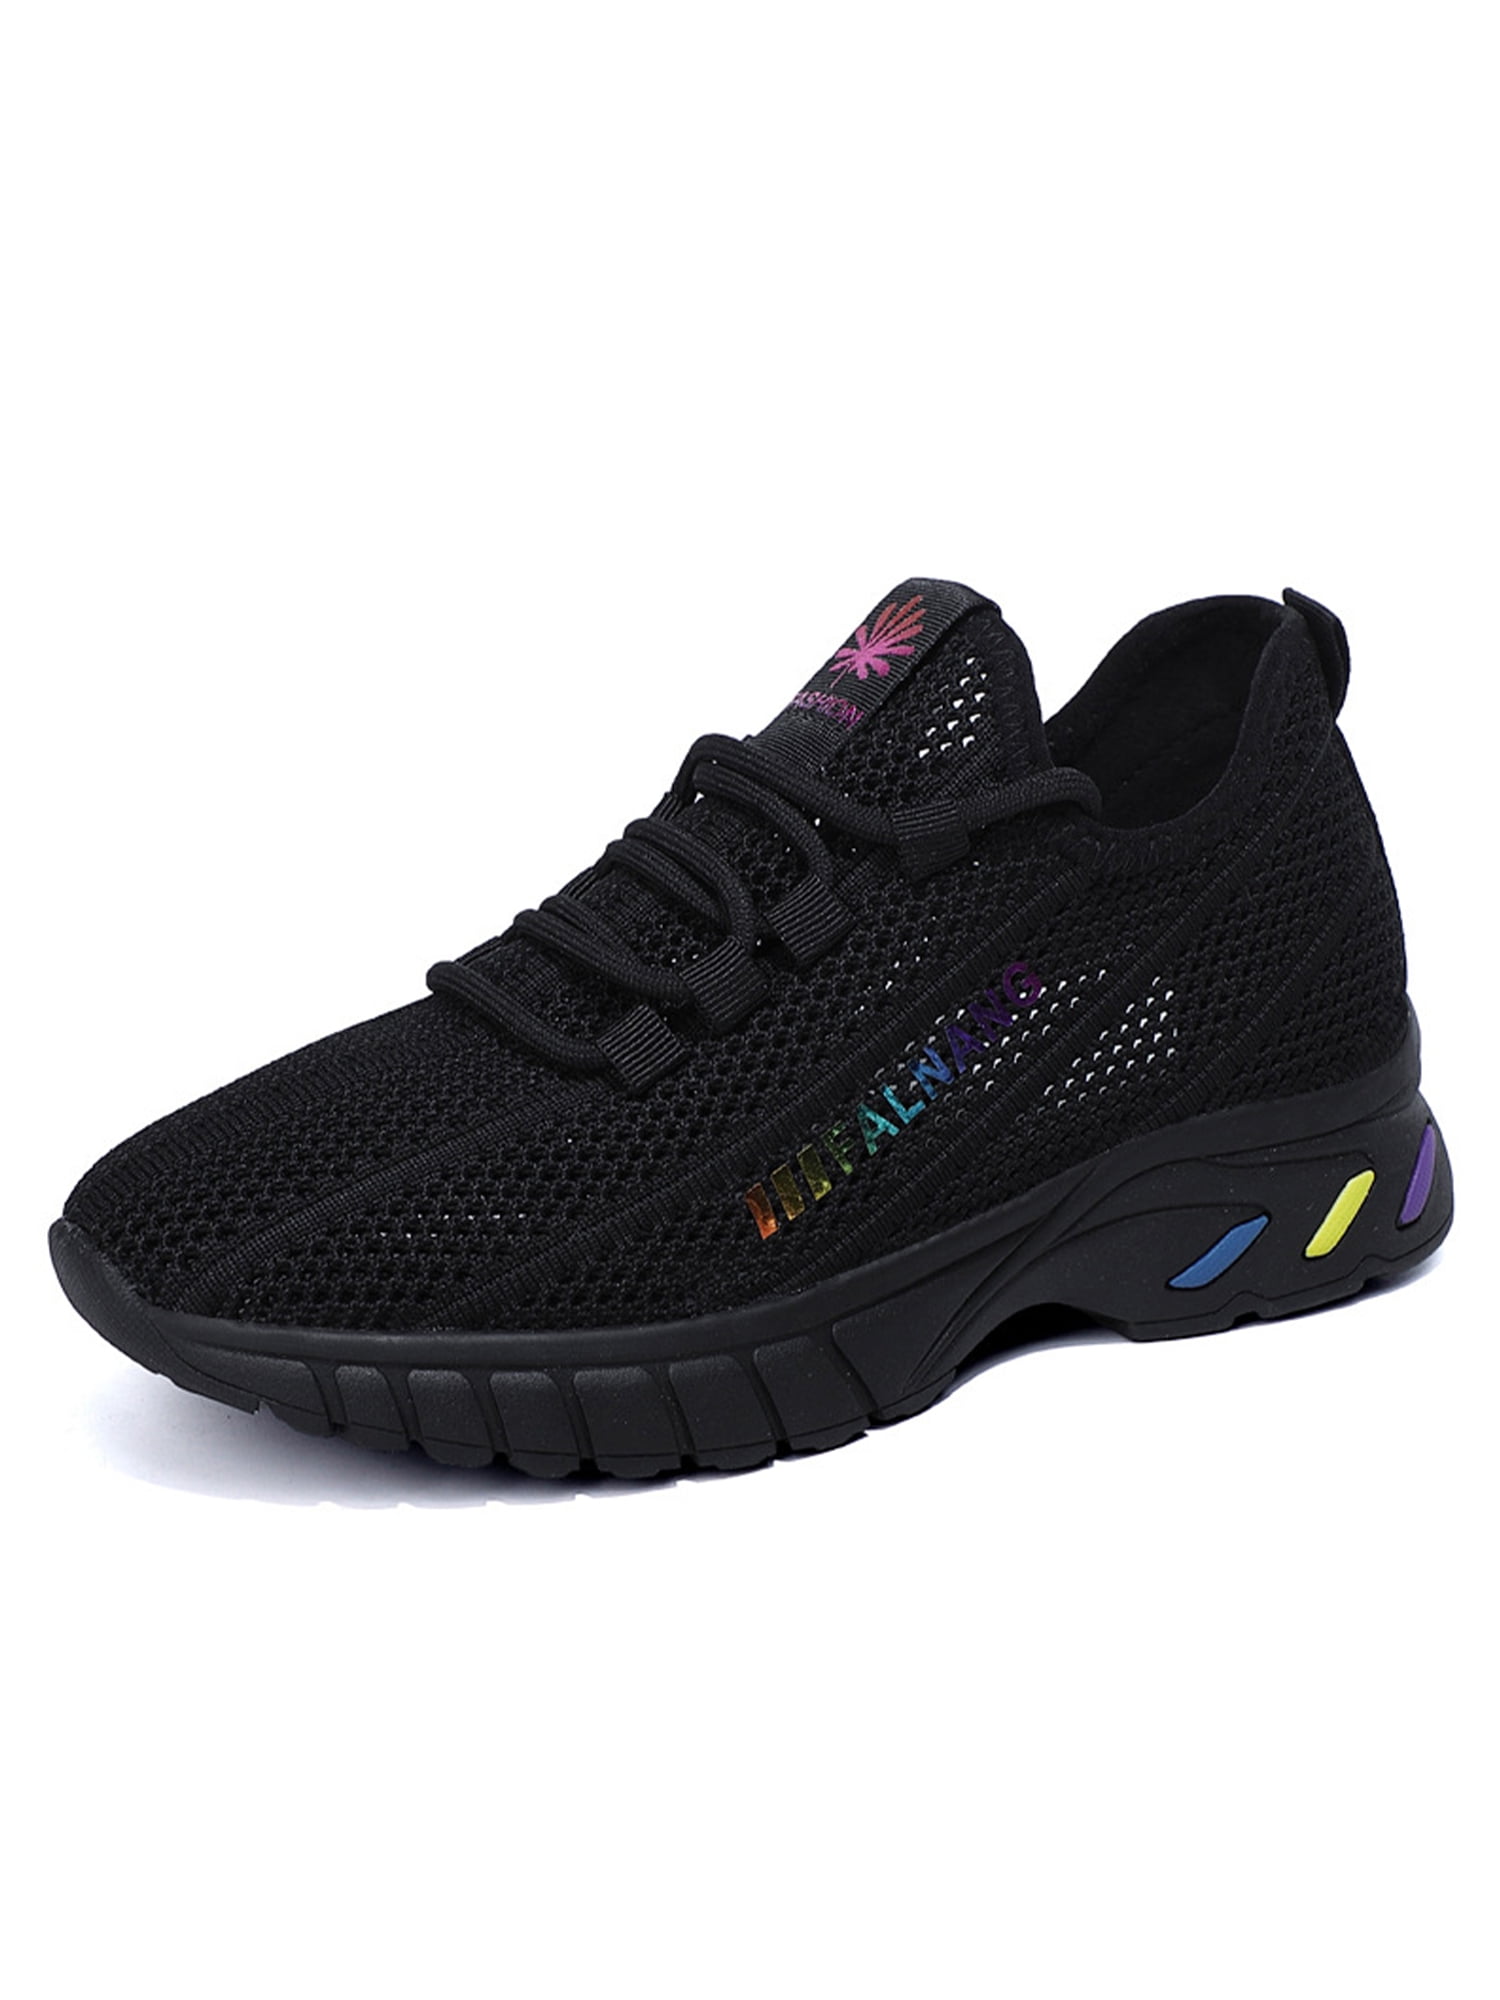 LADIES WOMENS SPORT SLIP ON JOGGING SNEAKERS RUNNING FASHION TRAINERS SHOES SIZE 